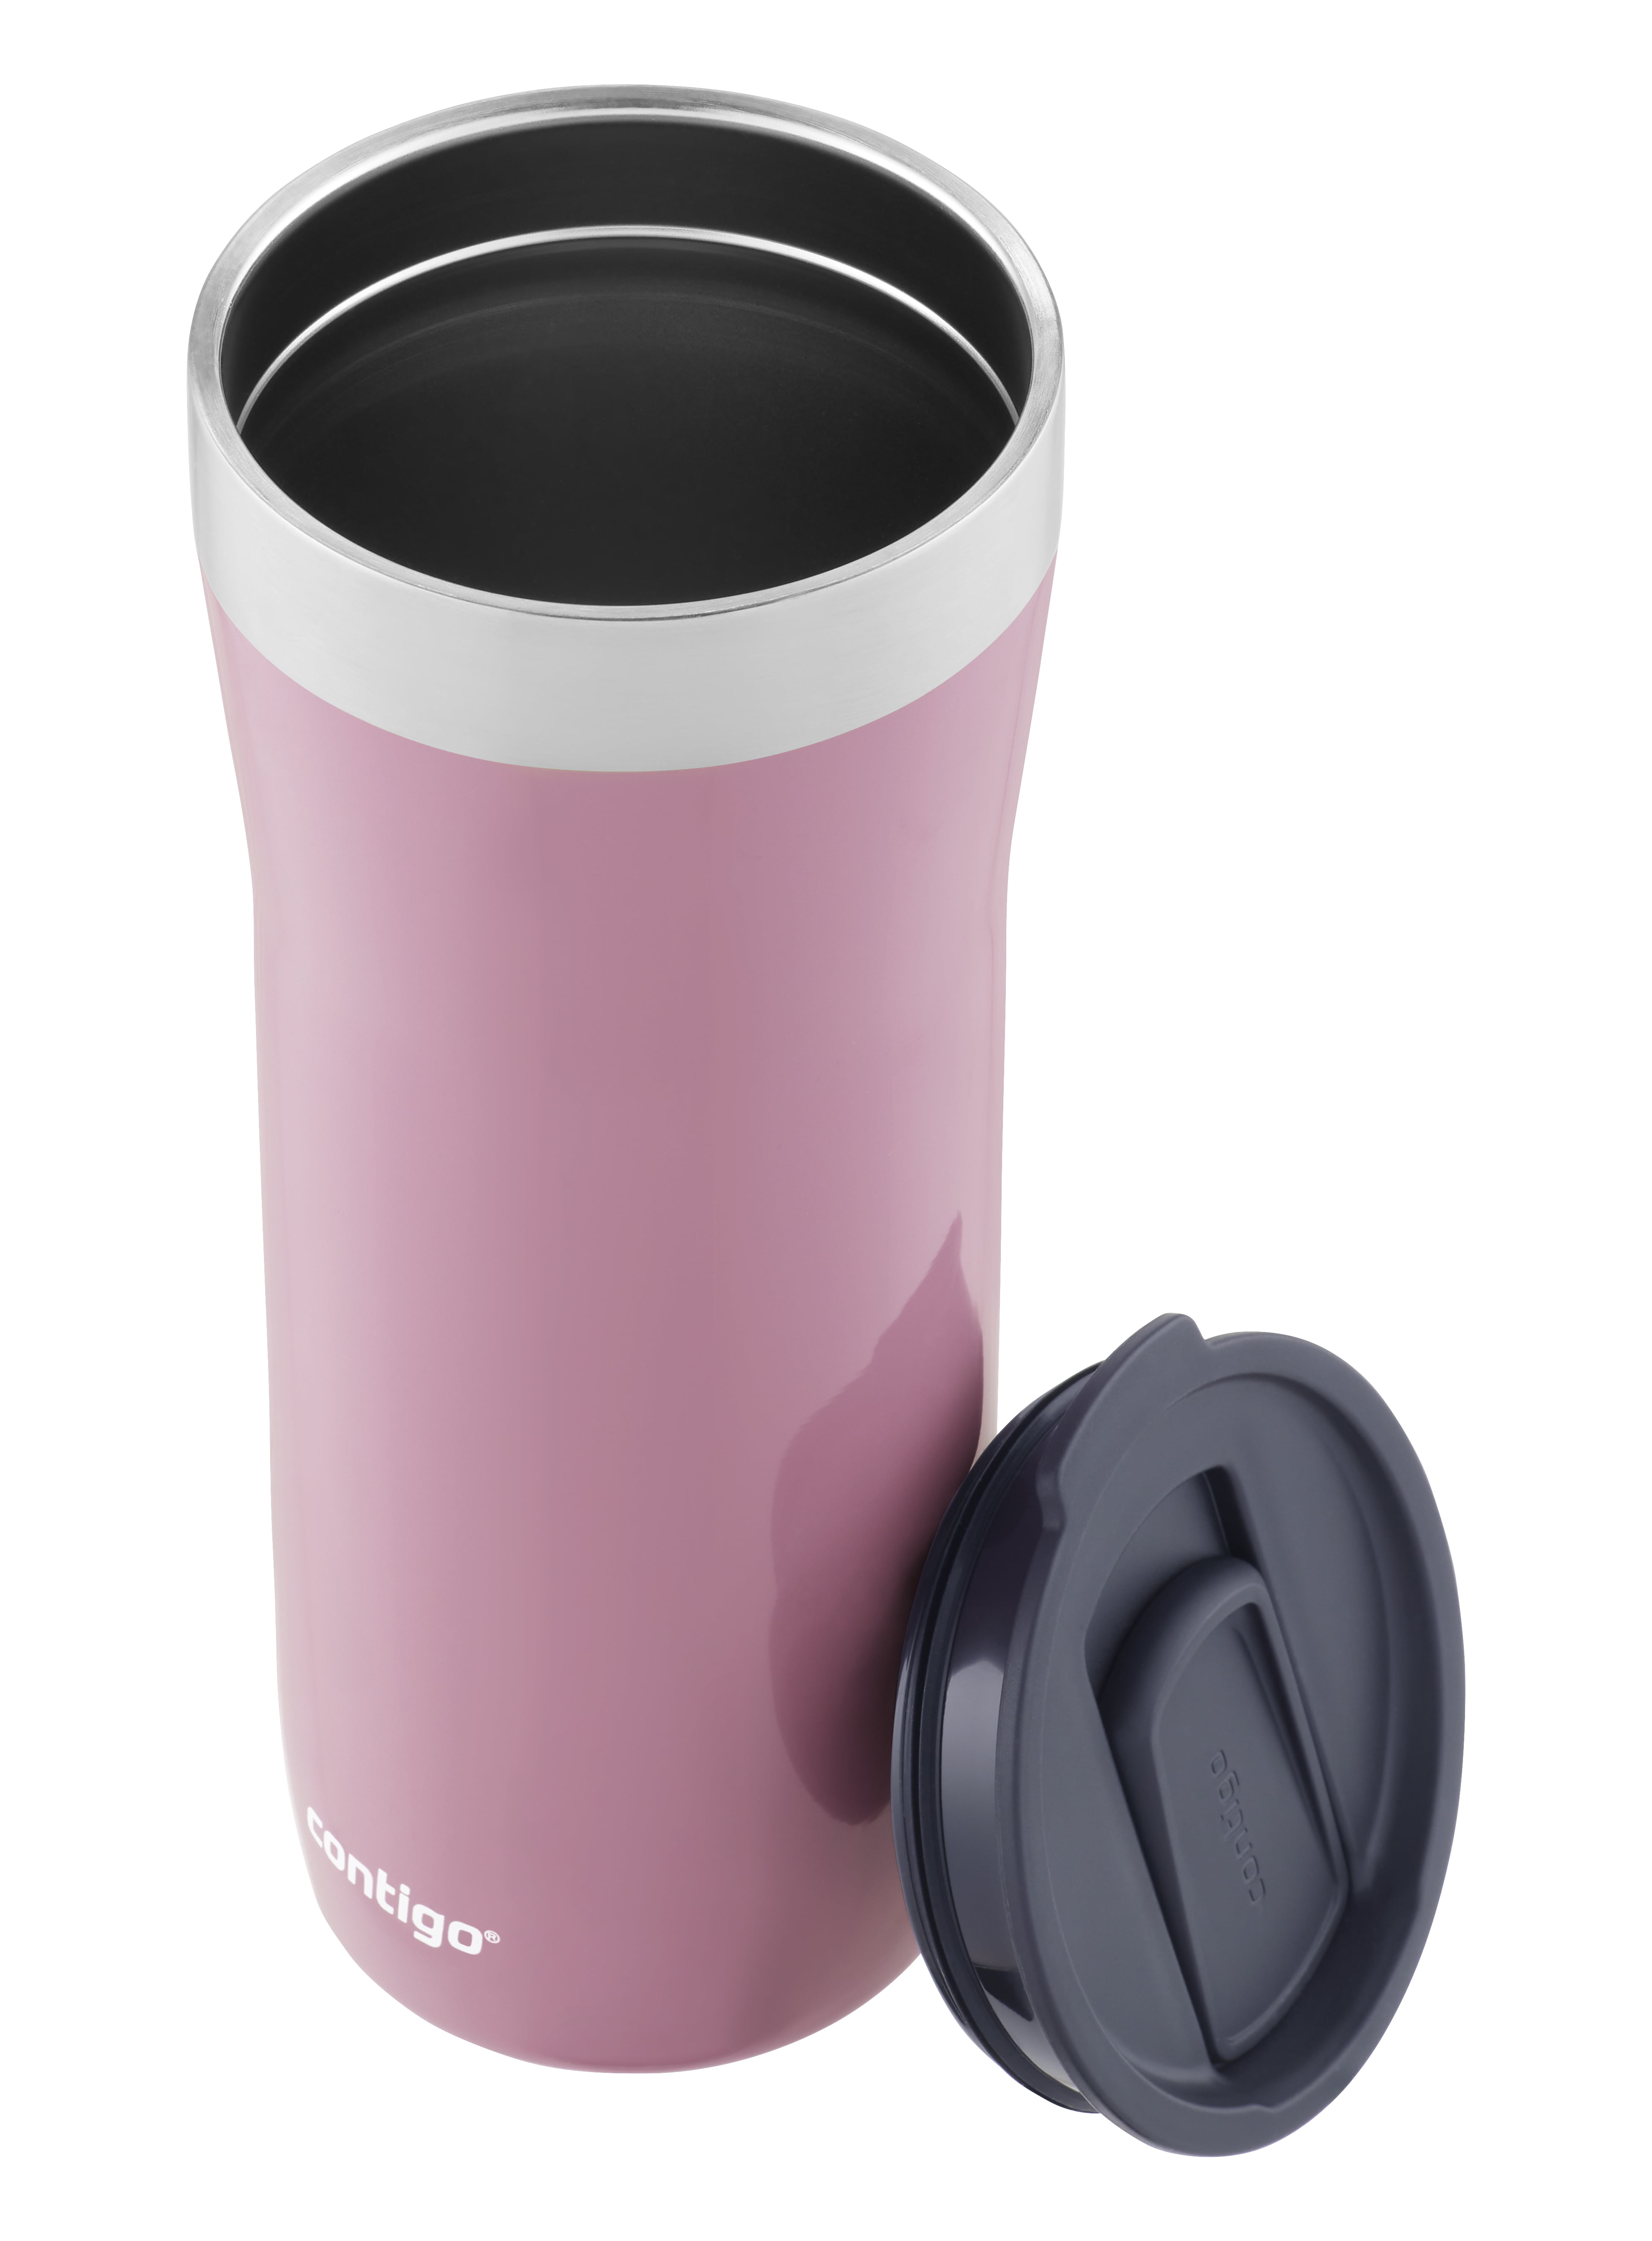 Contigo 2167645 Streeterville Stainless Steel Tumbler with Plastic Straw in Blue 32 fl oz.